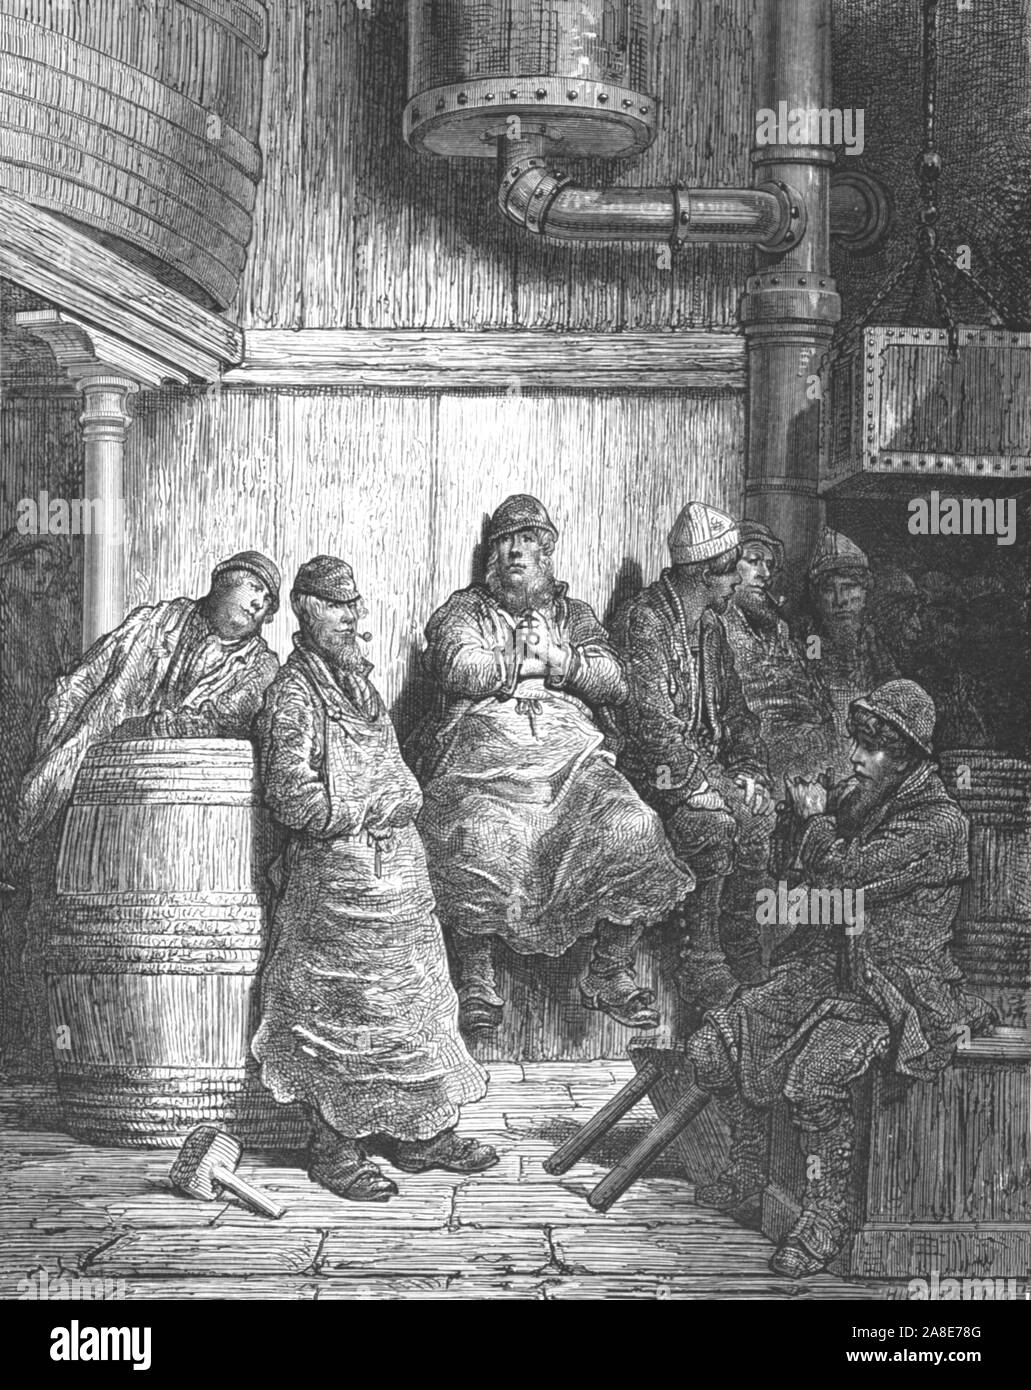 'Brewer's Men', 1872. Brewers take a break at Barclay, Perkins and Company brewery in Park Street, Southwark. From, &quot;LONDON. A Pilgrimage&quot; by Gustave Dore and Blanchard Jerrold. [Grant and Co., 72-78, Turnmill Street, E.C., 1872]. Stock Photo